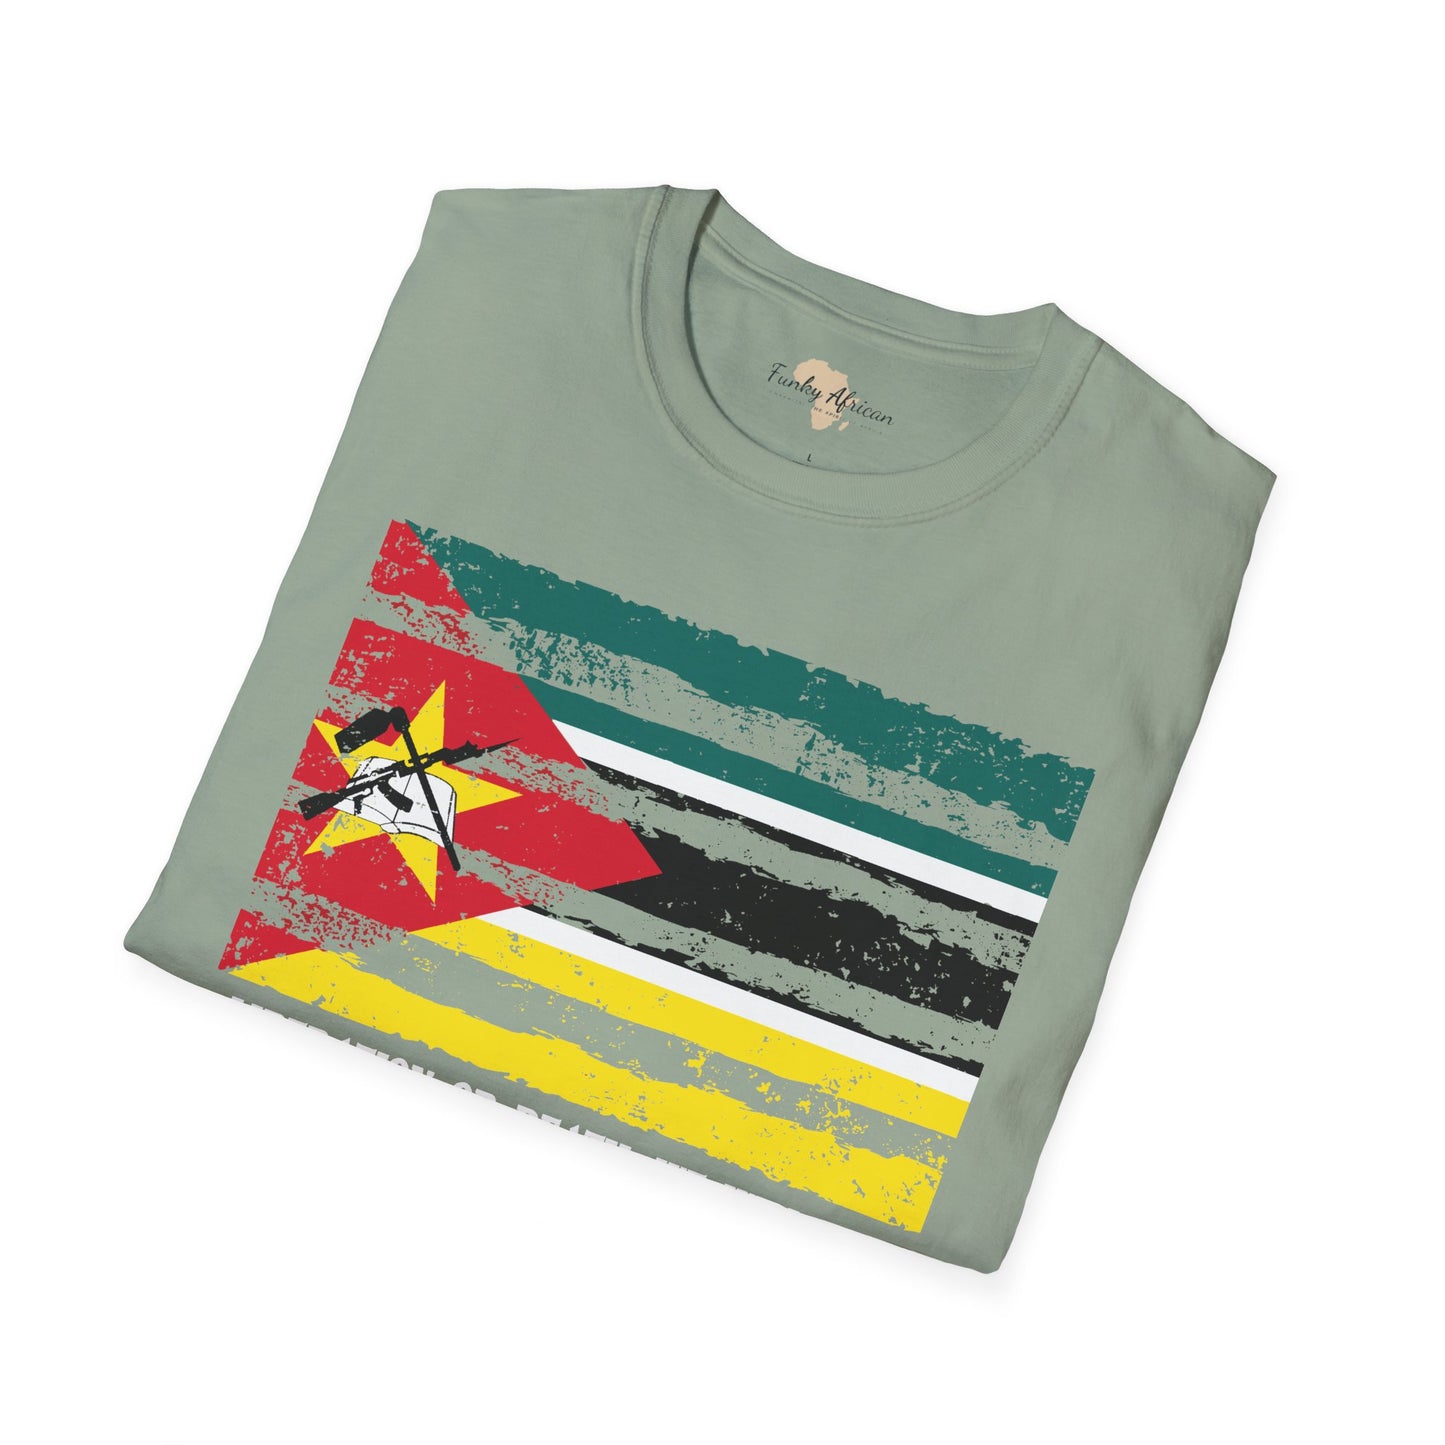 Mozambique strip unisex softstyle tee